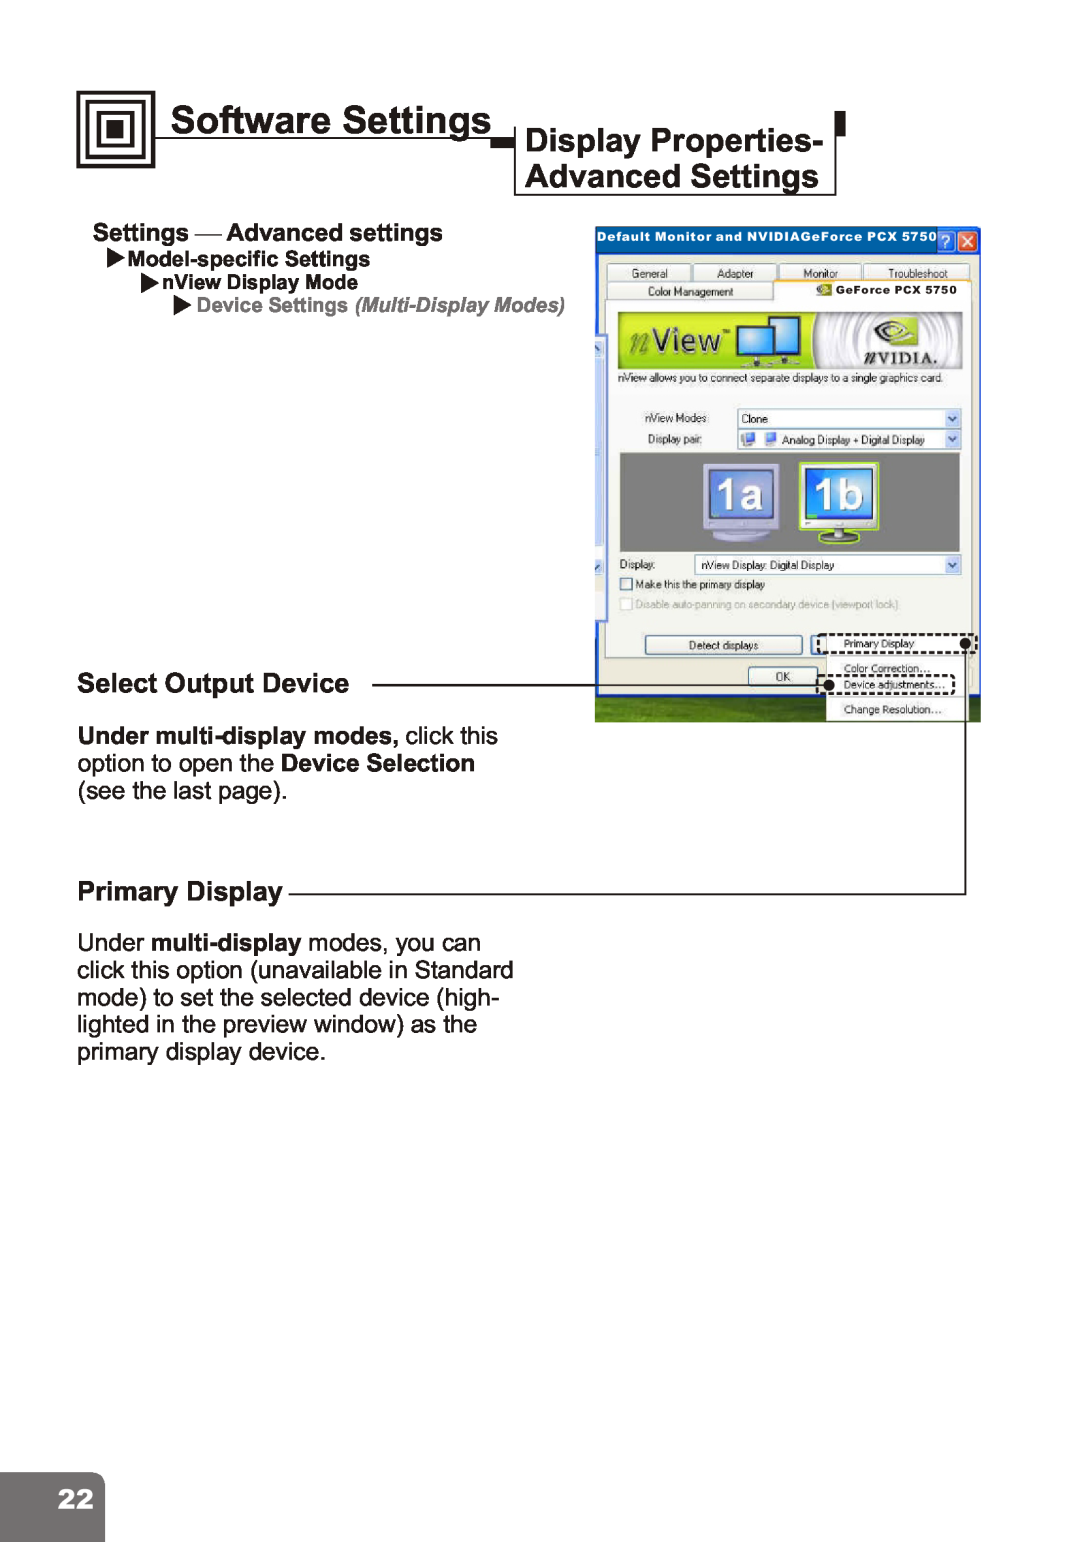 Nvidia PCI Express Series Primary Display, Under multi-display modes, click this, Software Settings, Select Output Device 